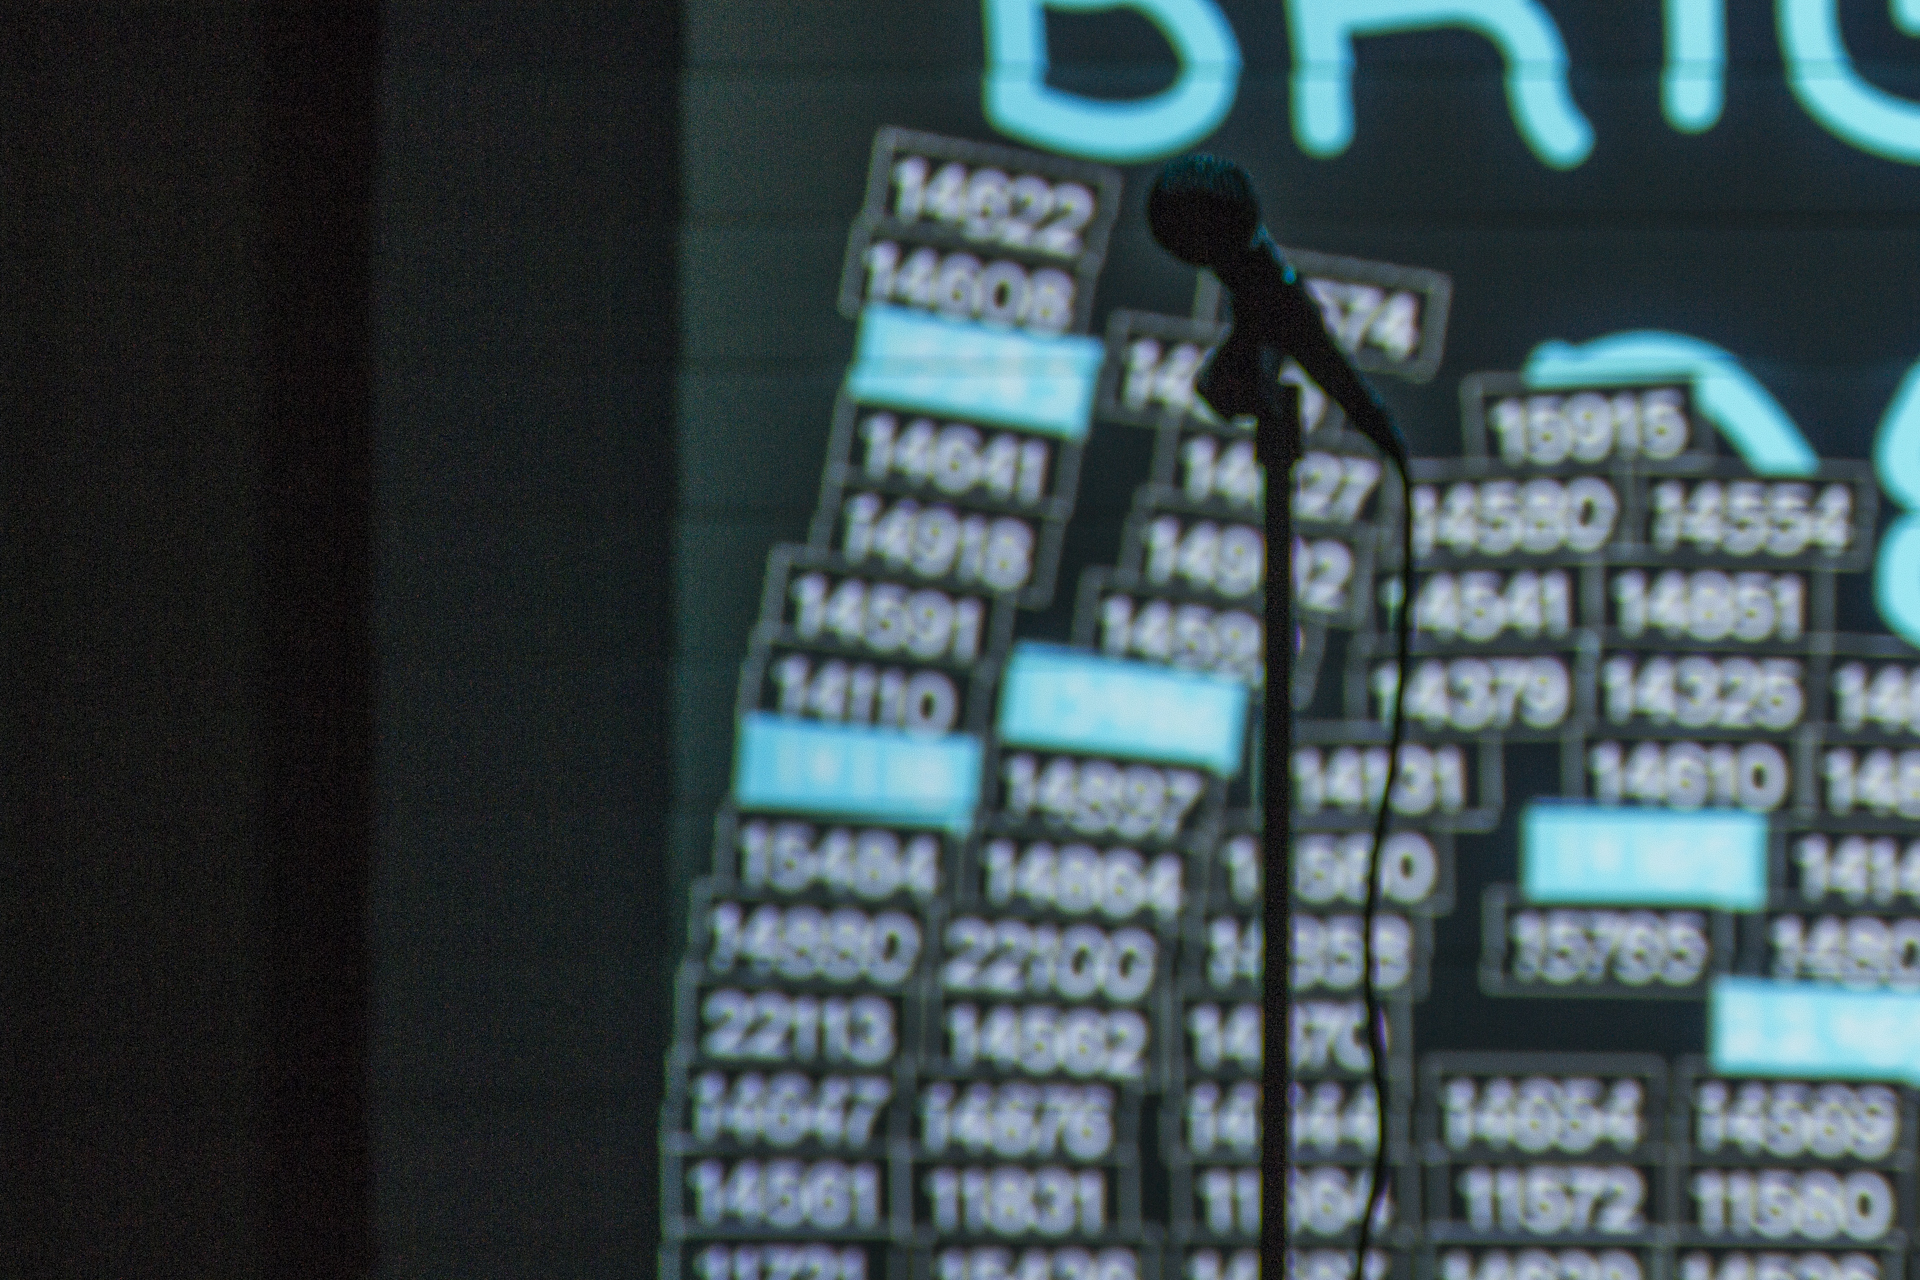 Detail of Brightmoor Detroit screen with microphone